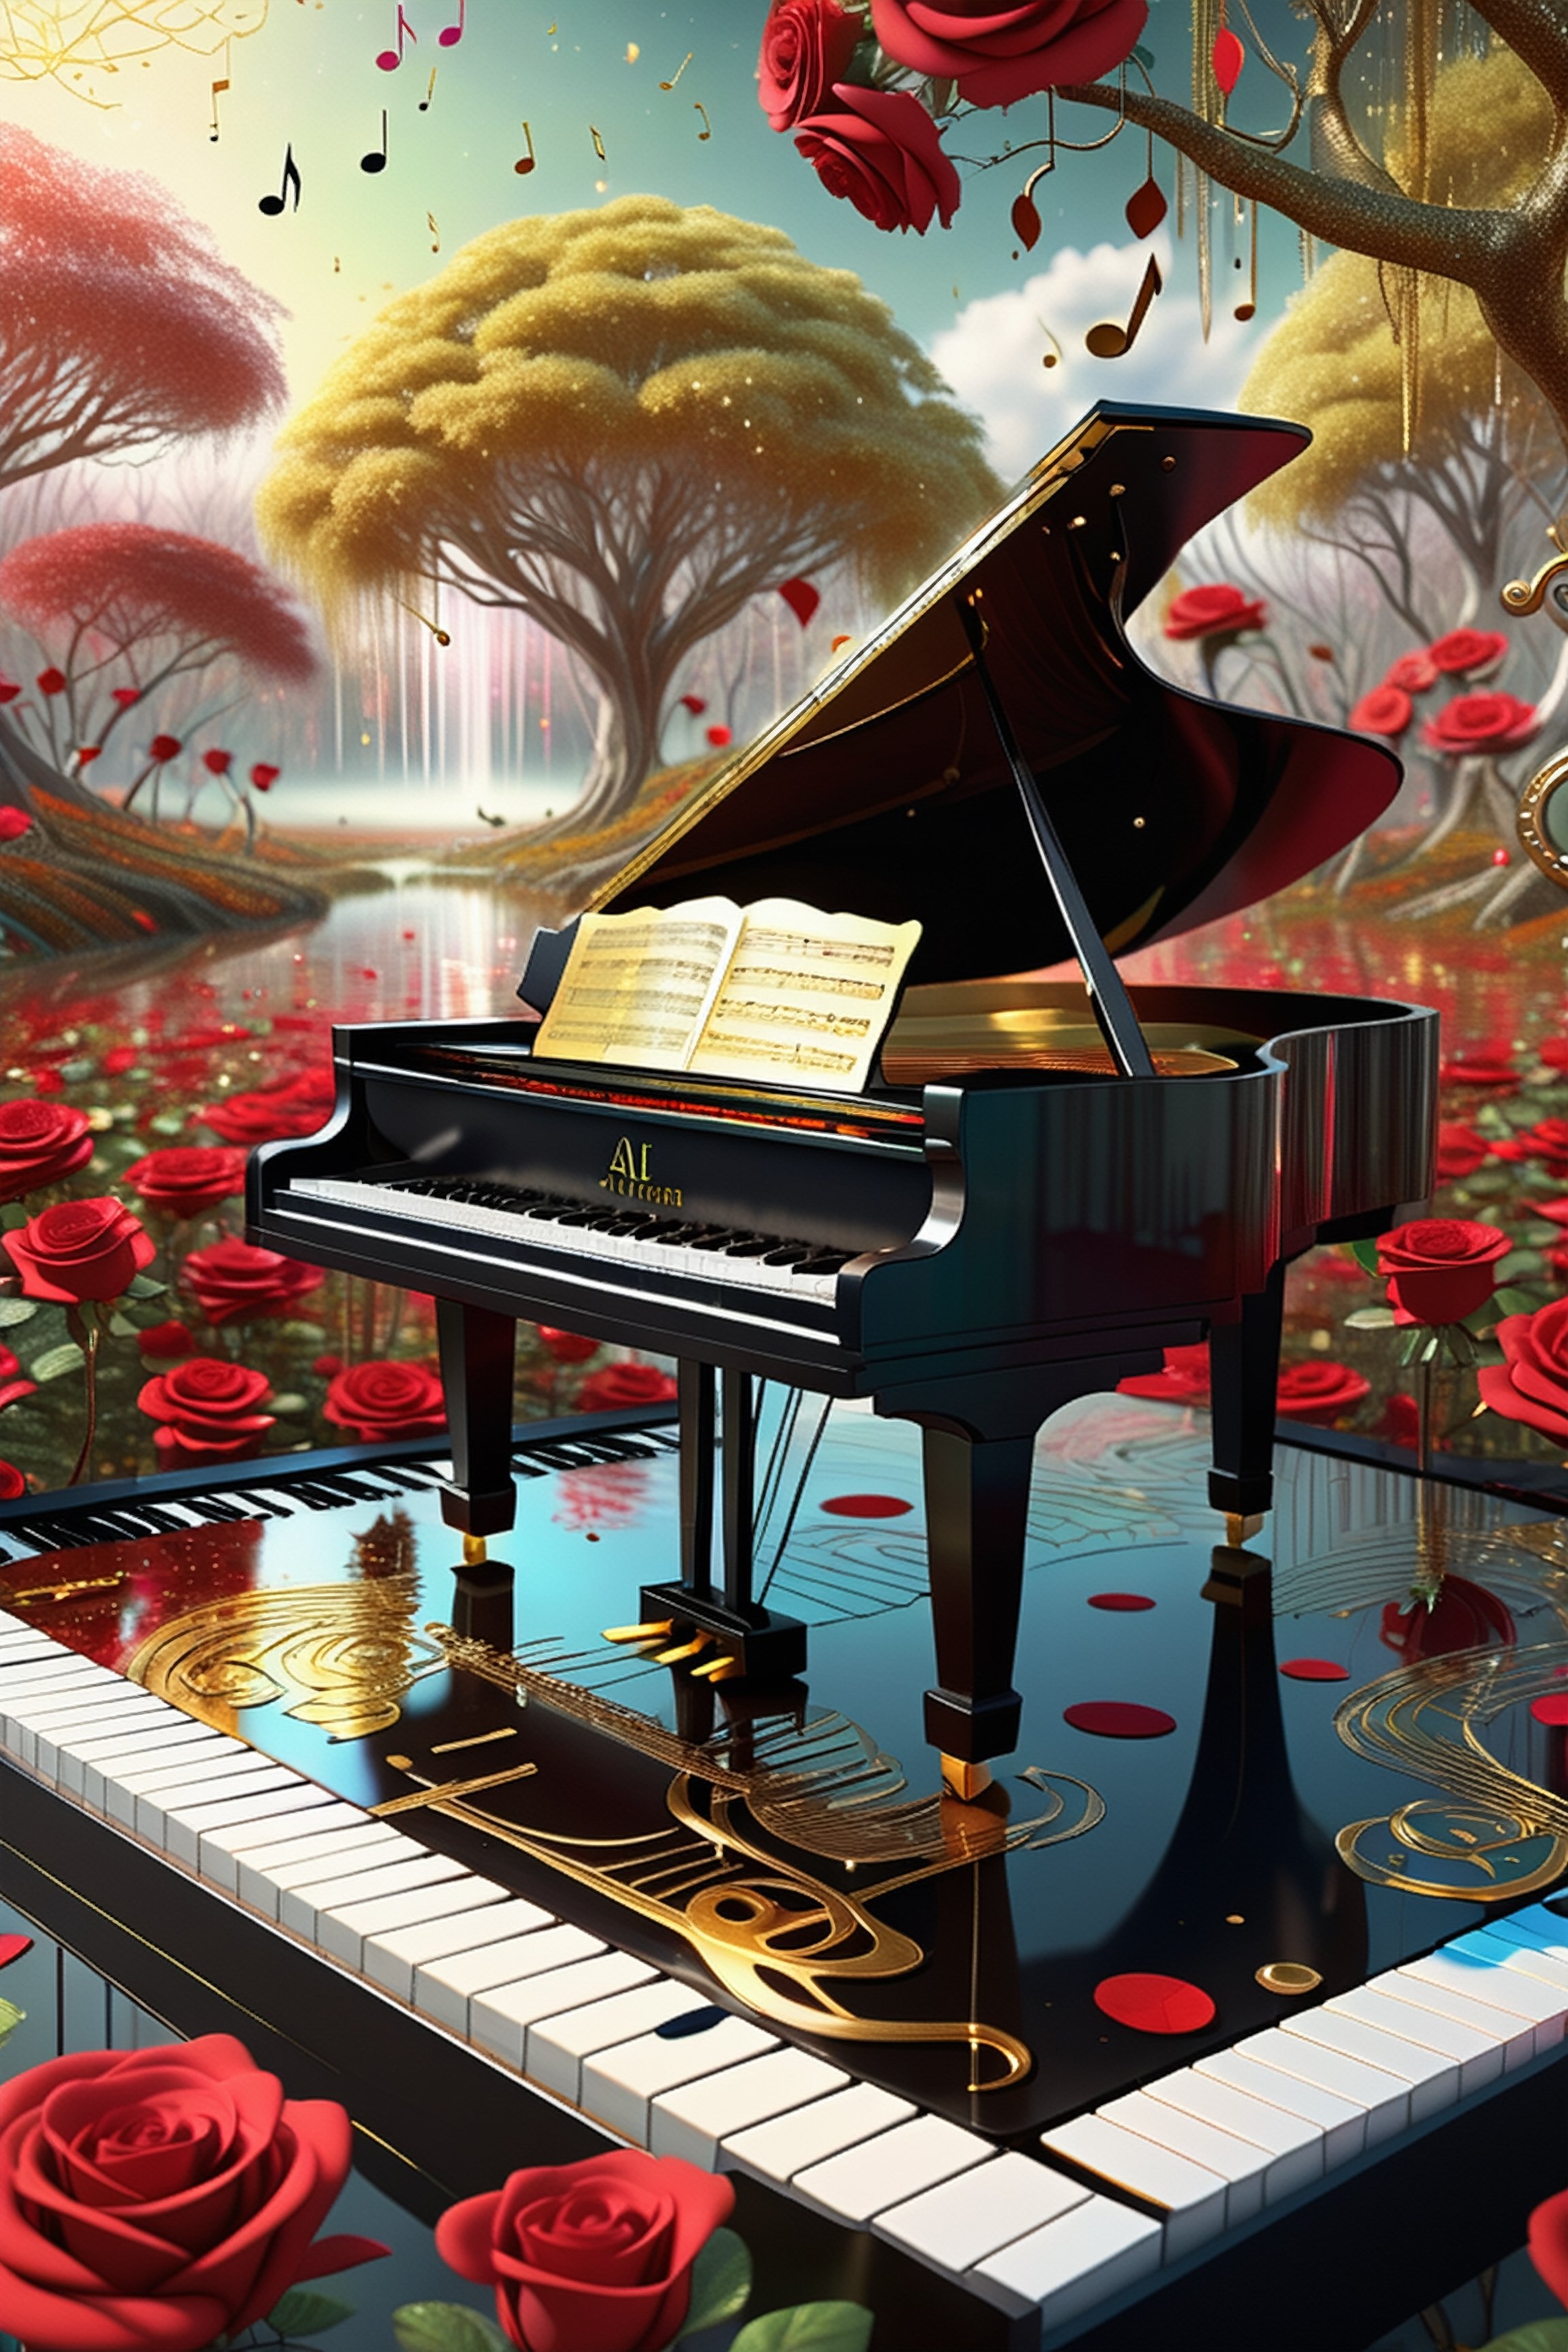 a grand piano over there far away a Swamp, with music notes colorful Allen world with DMA, analogue spectrum hologram, close-up a roses, hologram vortex simulation, Cristal trees, red, gold and silver patterns, swamp background hyper detailed, with Inca filer of gold, music notes, high resolution, cinema 4D